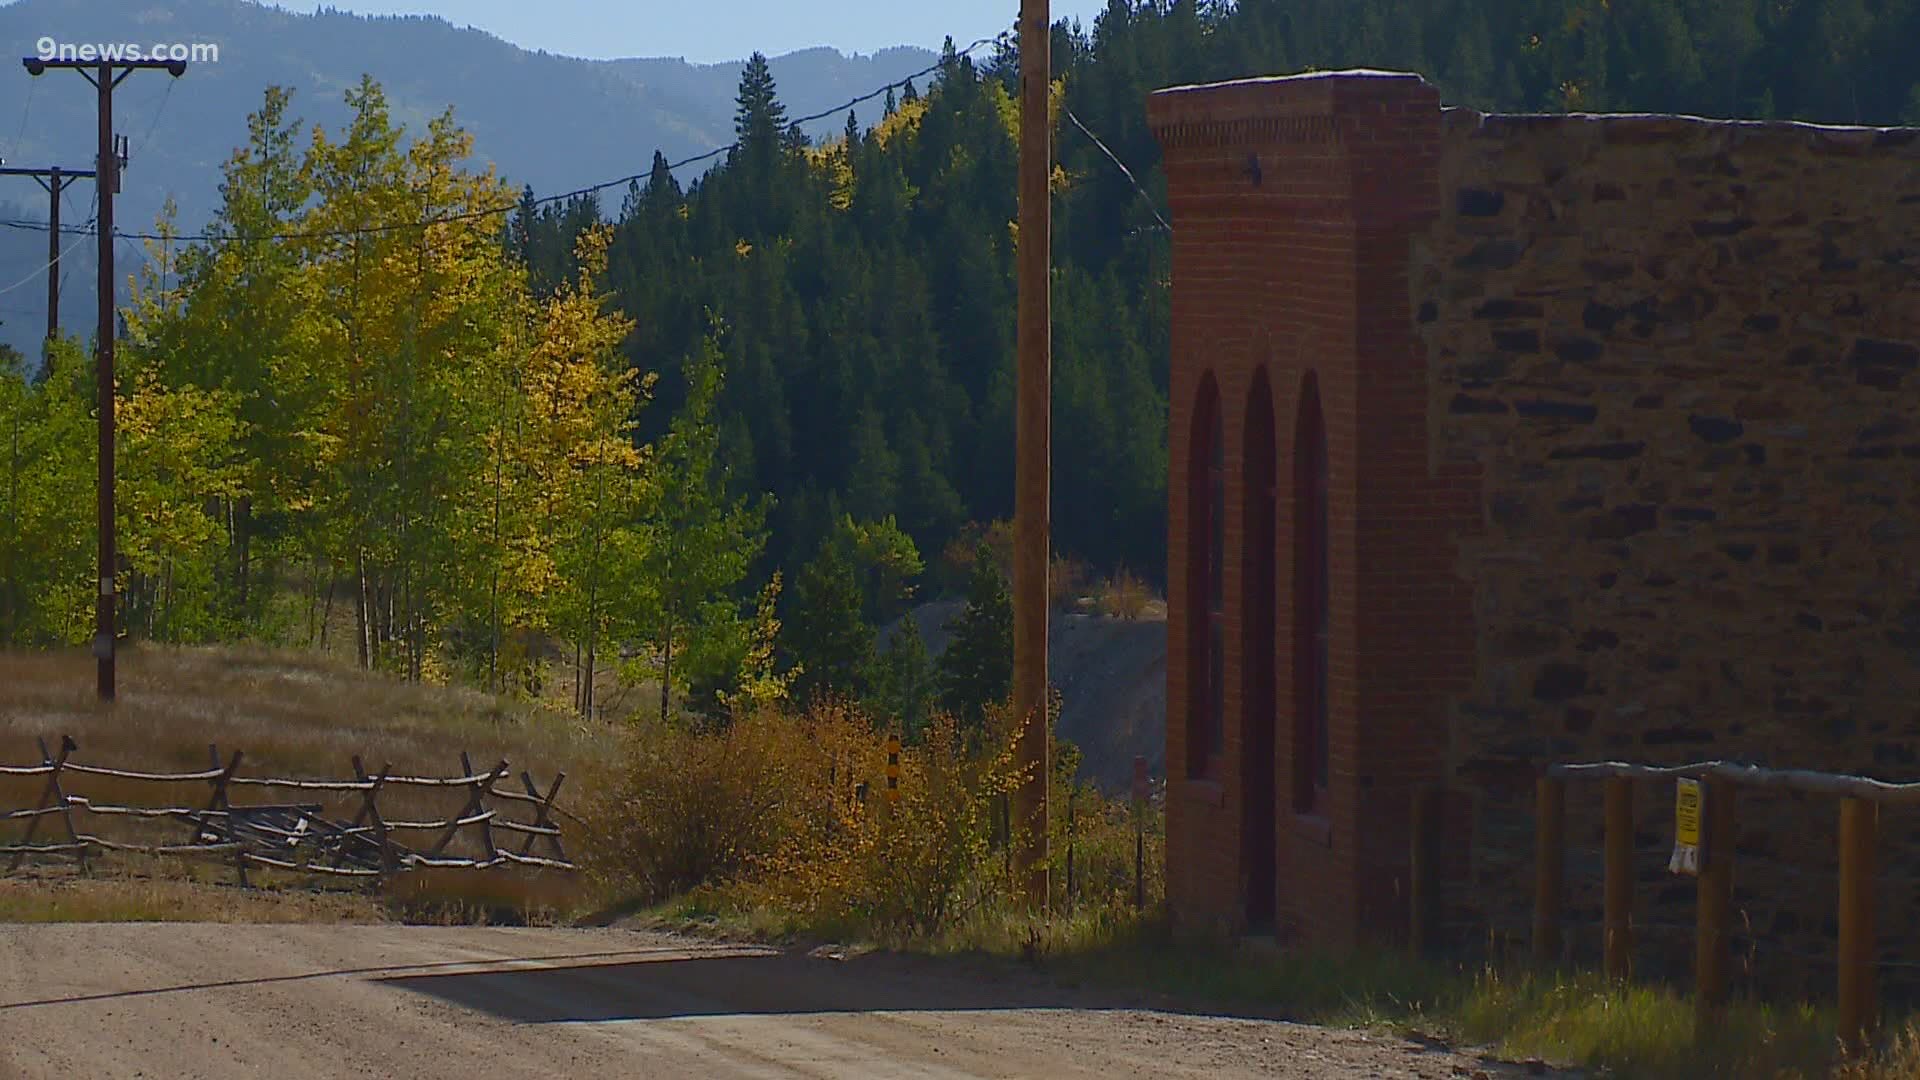 Fall colors are popping in the old west town of Nevadaville, where the history and beauty of Colorado blend together this time of year.